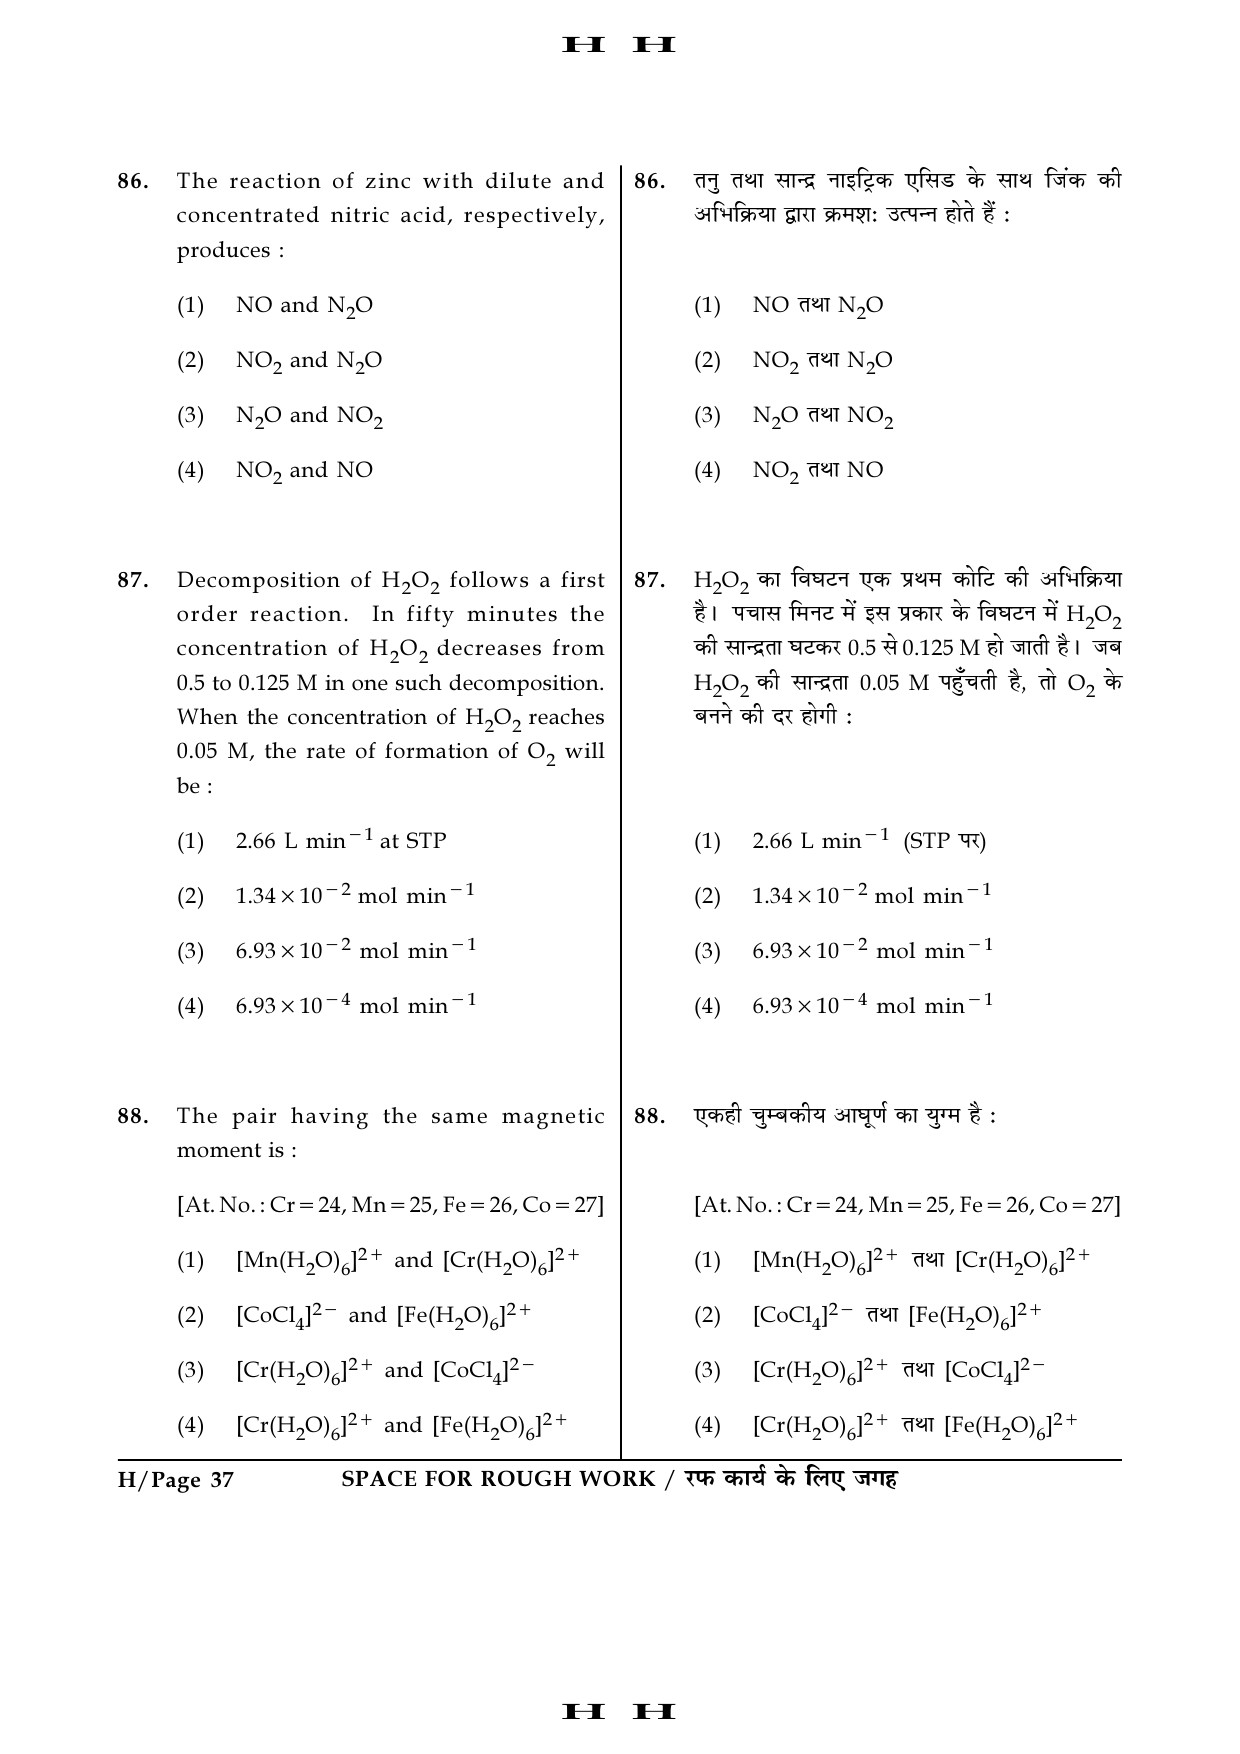 JEE Main Exam Question Paper 2016 Booklet H 37